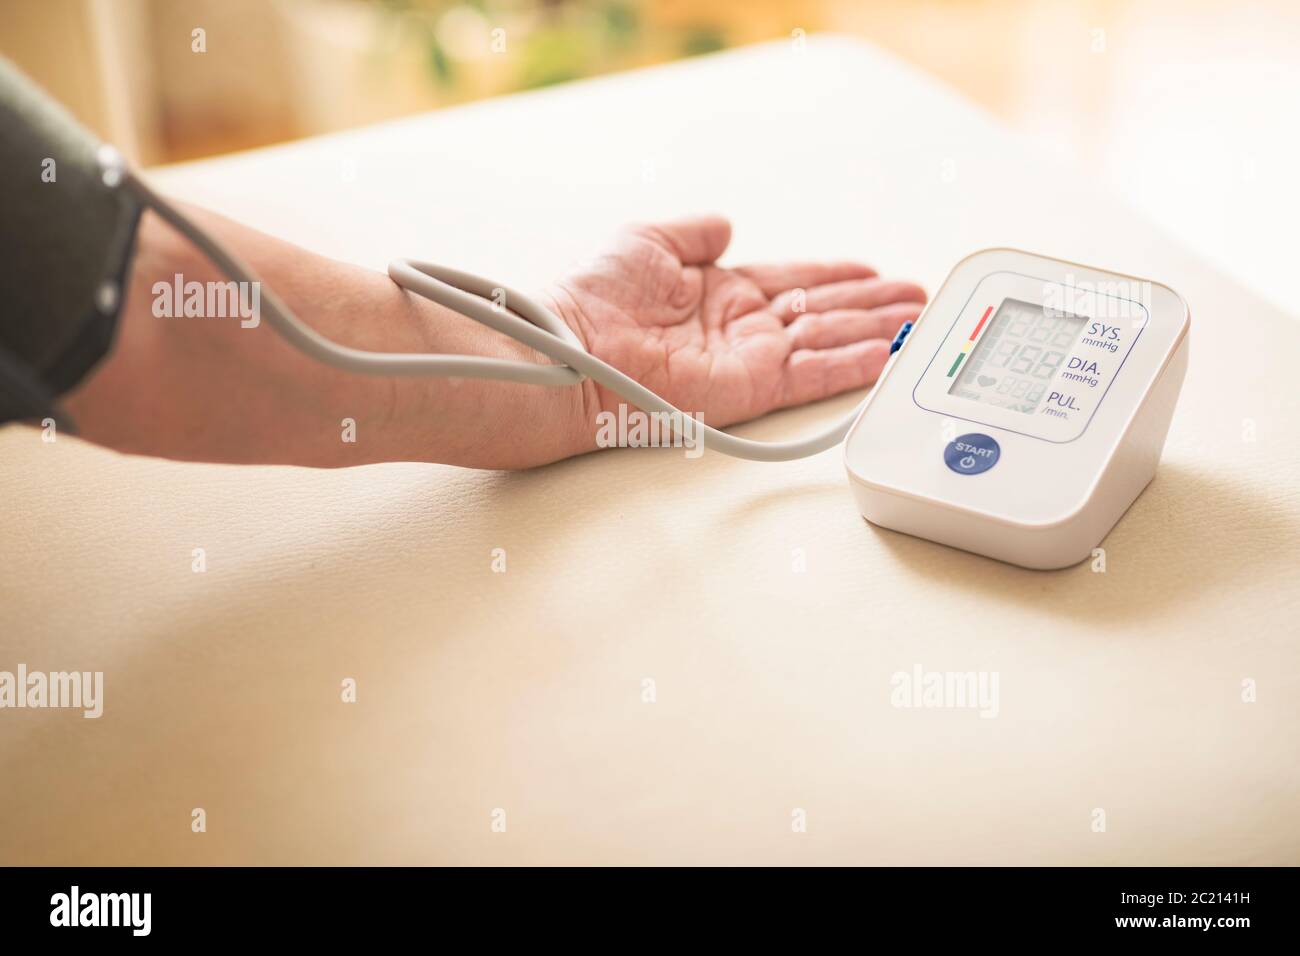 Blood pressure test with digital monitor Stock Photo